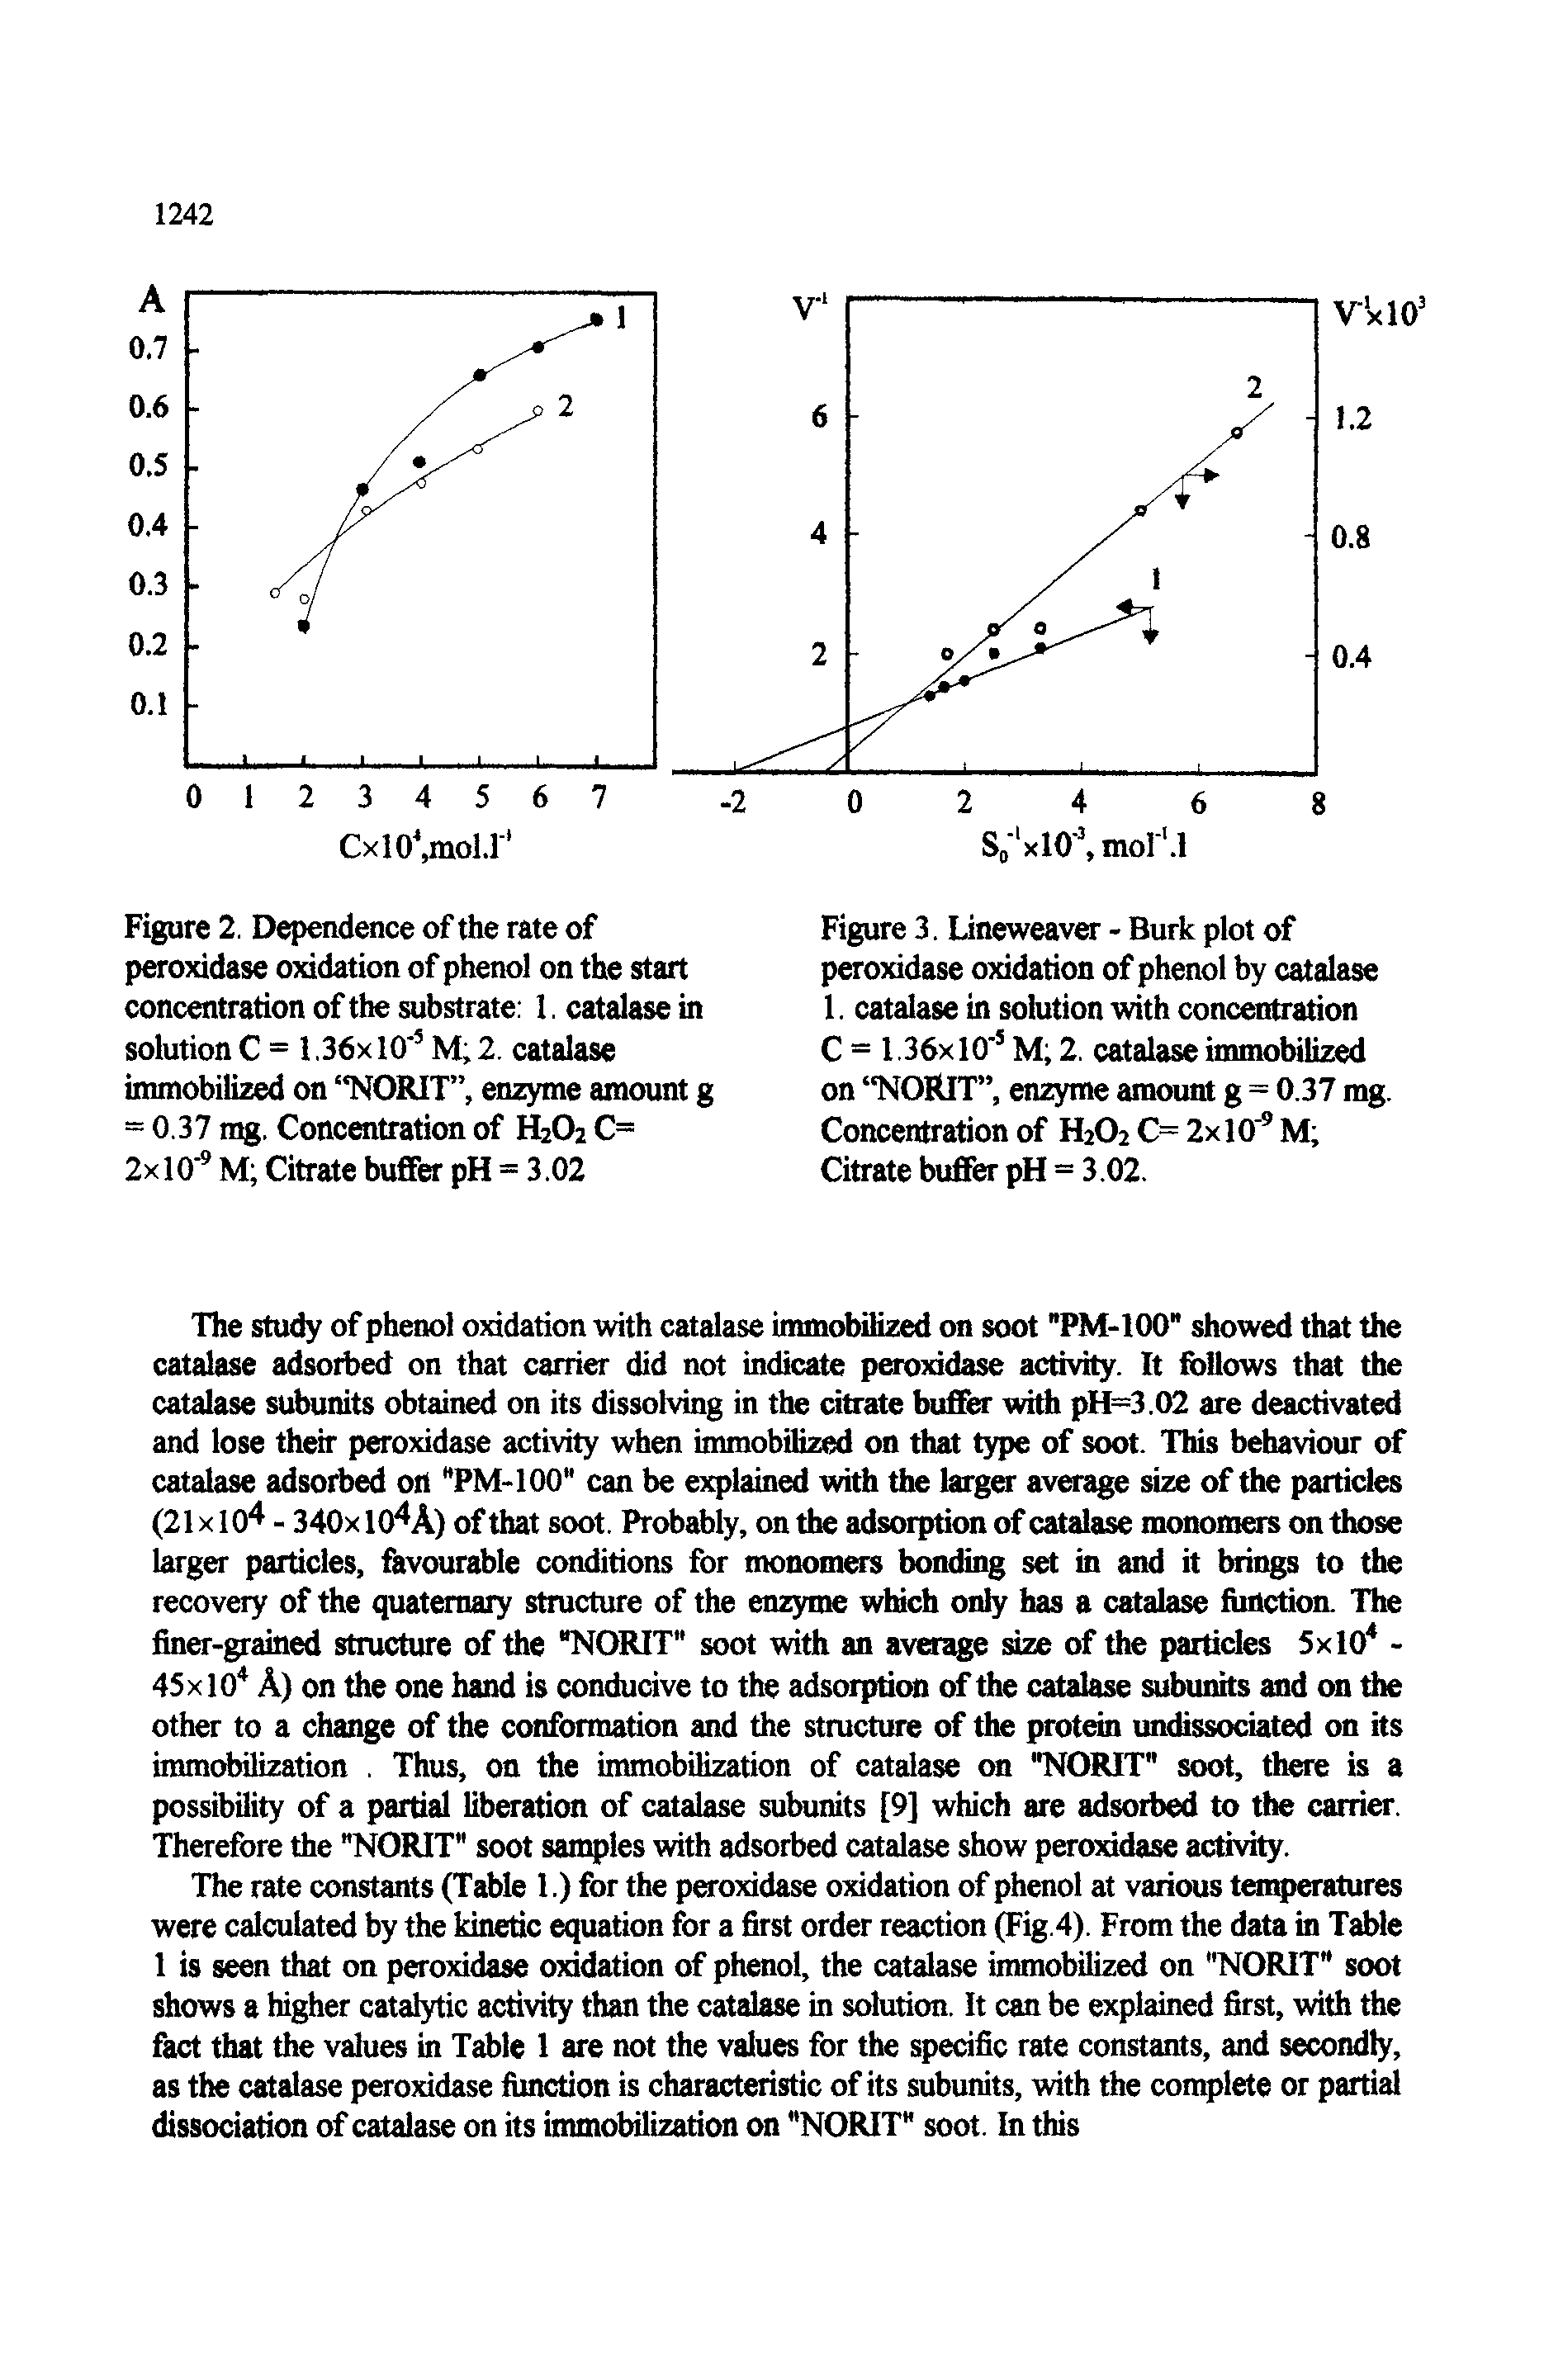 Figure 3. Lineweaver - Burk plot of peroxidase oxidation of phenol by catalase 1. catalase in solution with concentration C = 1.36x10 M 2. catalase immobilized on NORiT , enzyme amount g = 0.37 mg. Concentration of H2O2 C= 2x10 M Citrate buffer pH = 3.02.